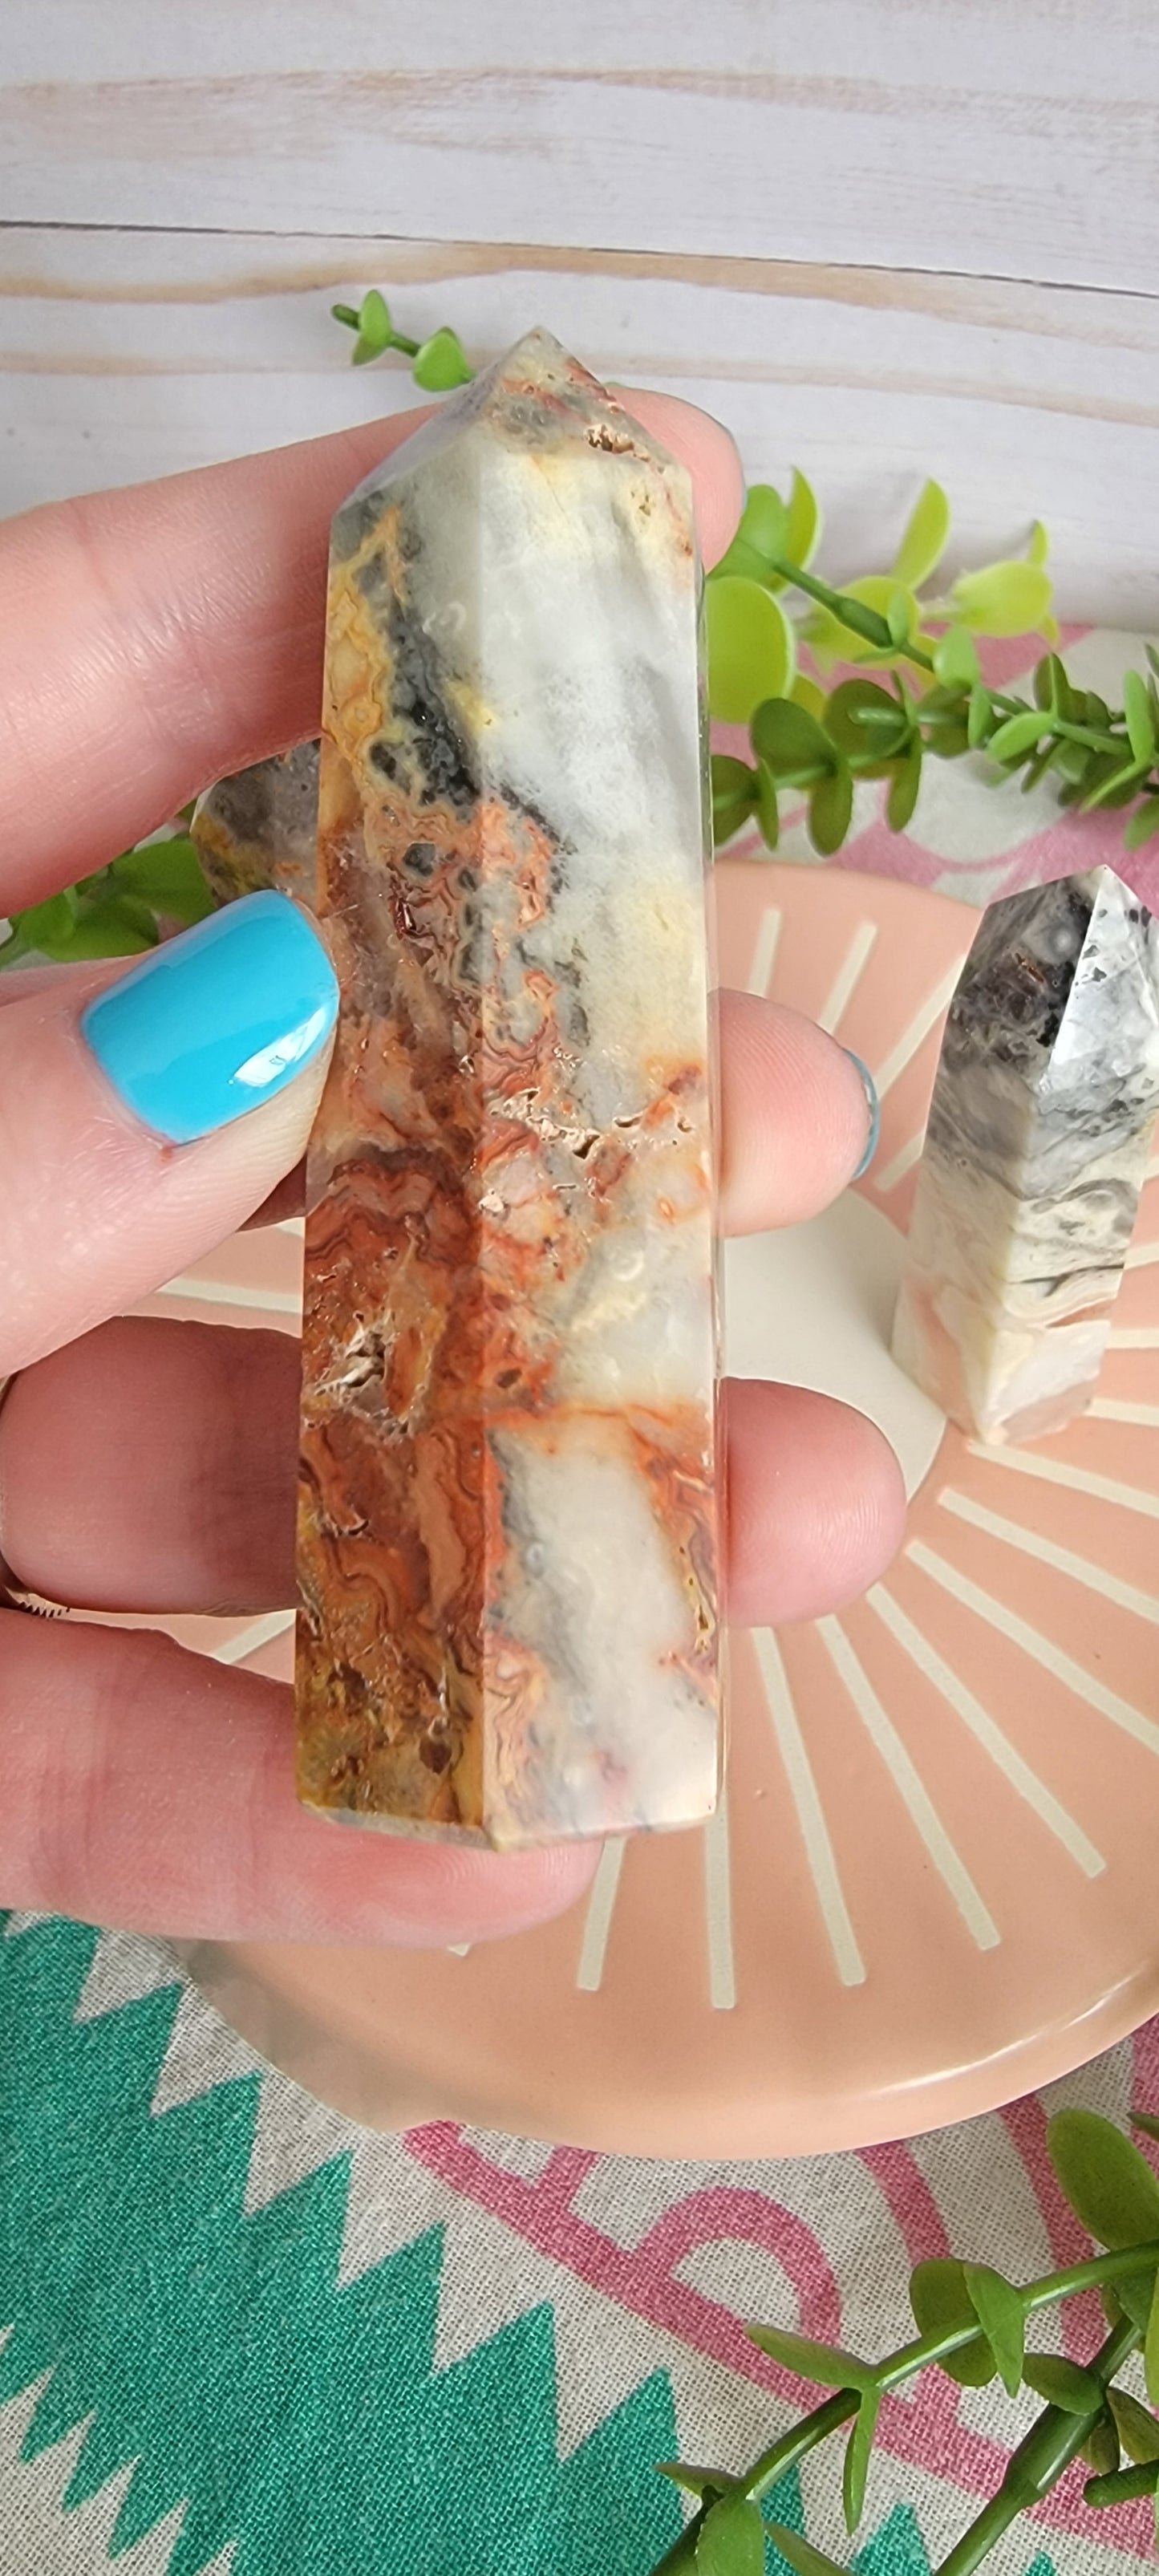 Crazy Lace Agate Bayside Treasures